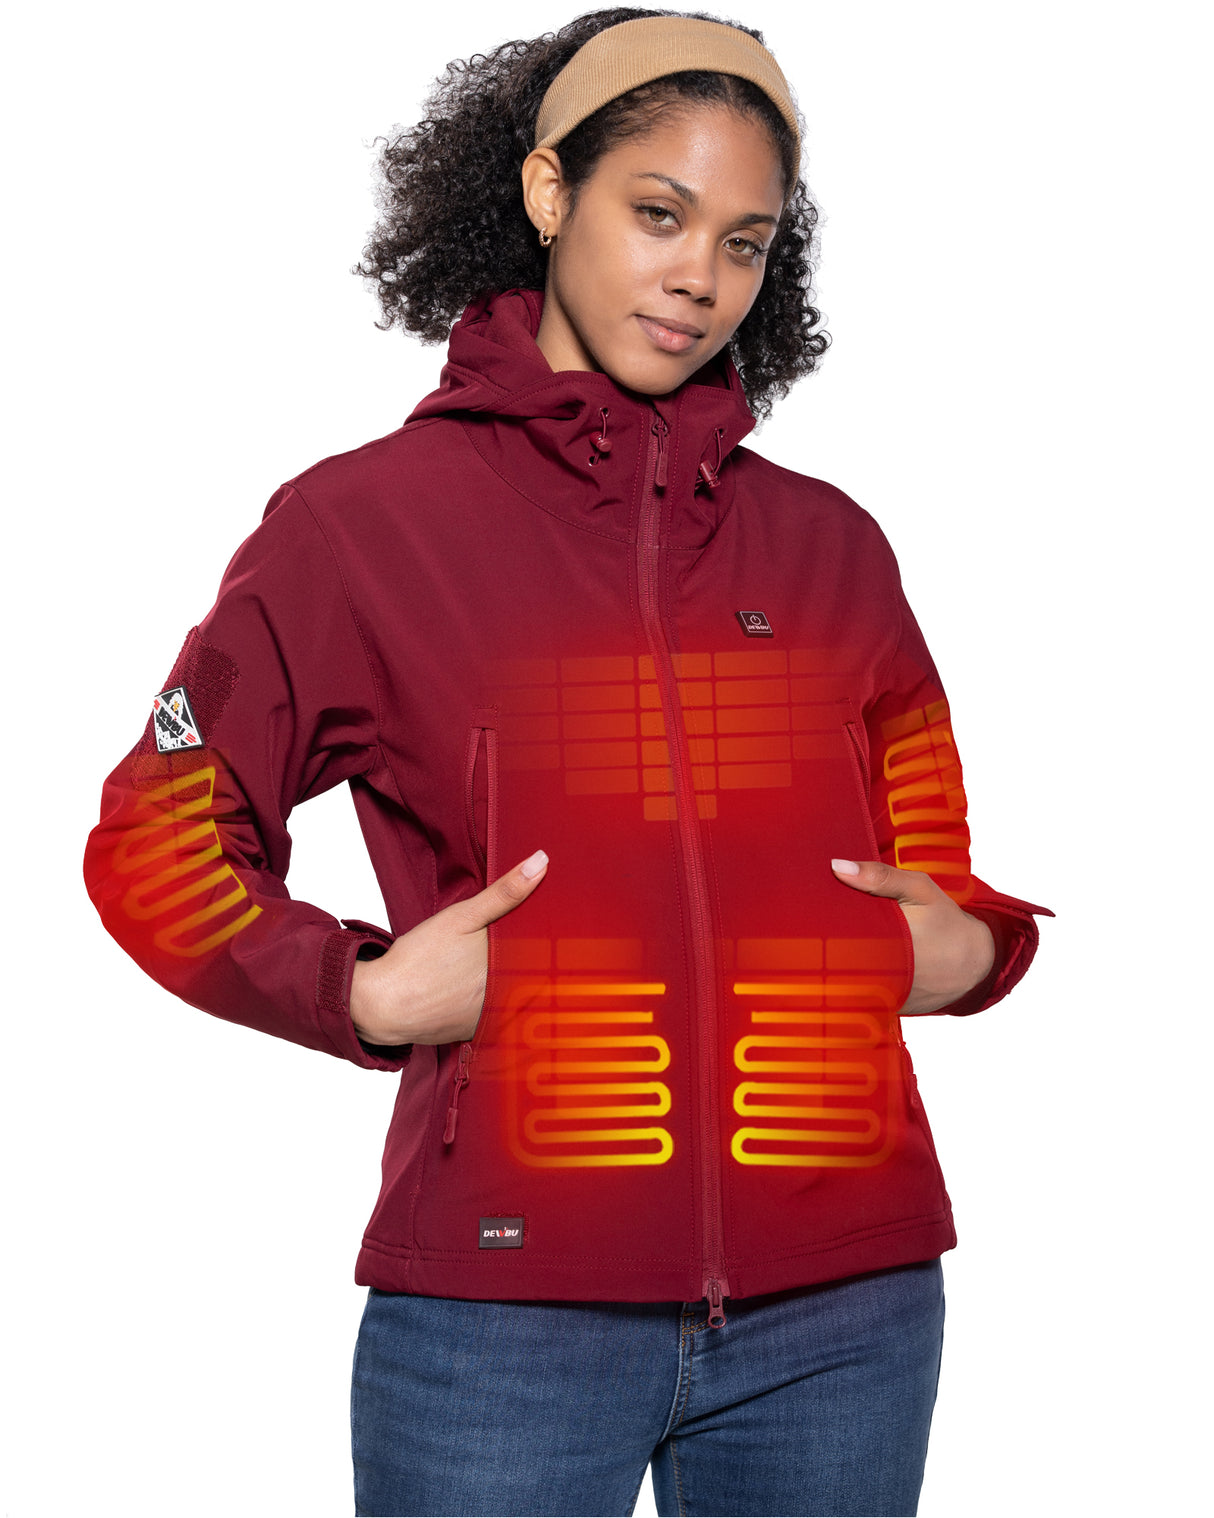 DEWBU Women's Soft Shell Heated Jacket with 12V Battery Pack - Black Red / L